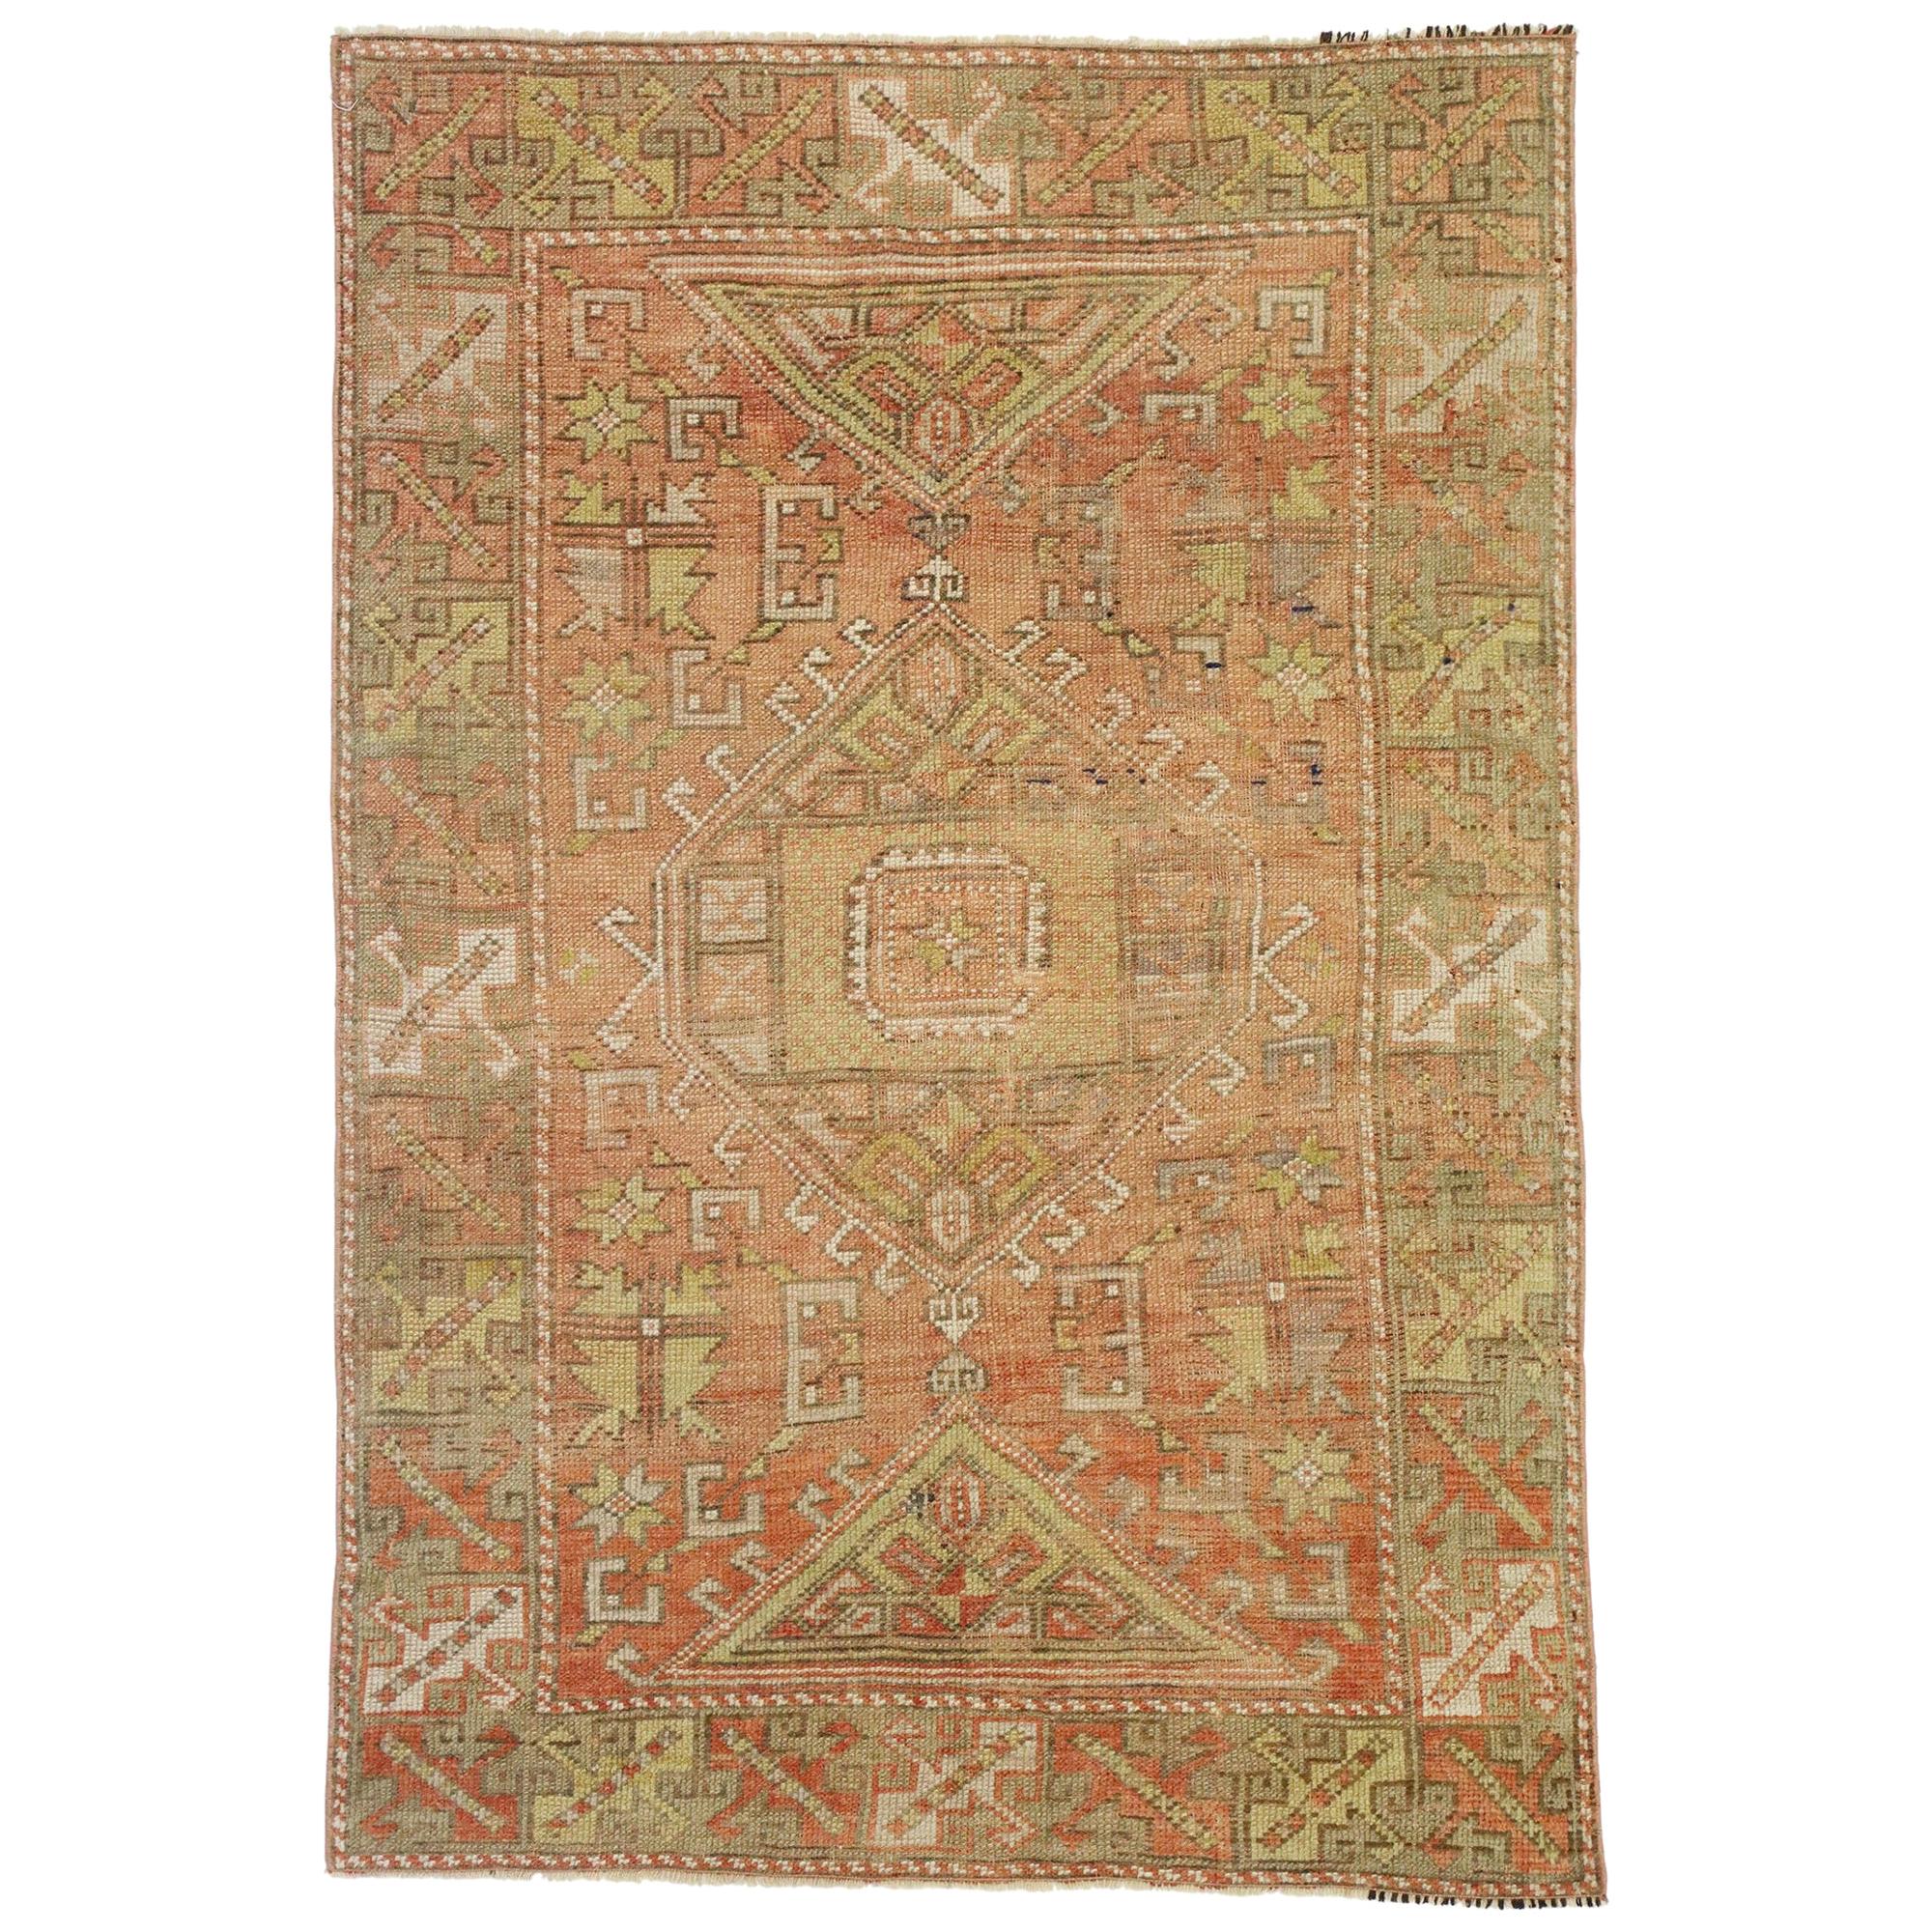 Vintage Turkish Oushak Rug with Rustic Lodge and Tribal Style